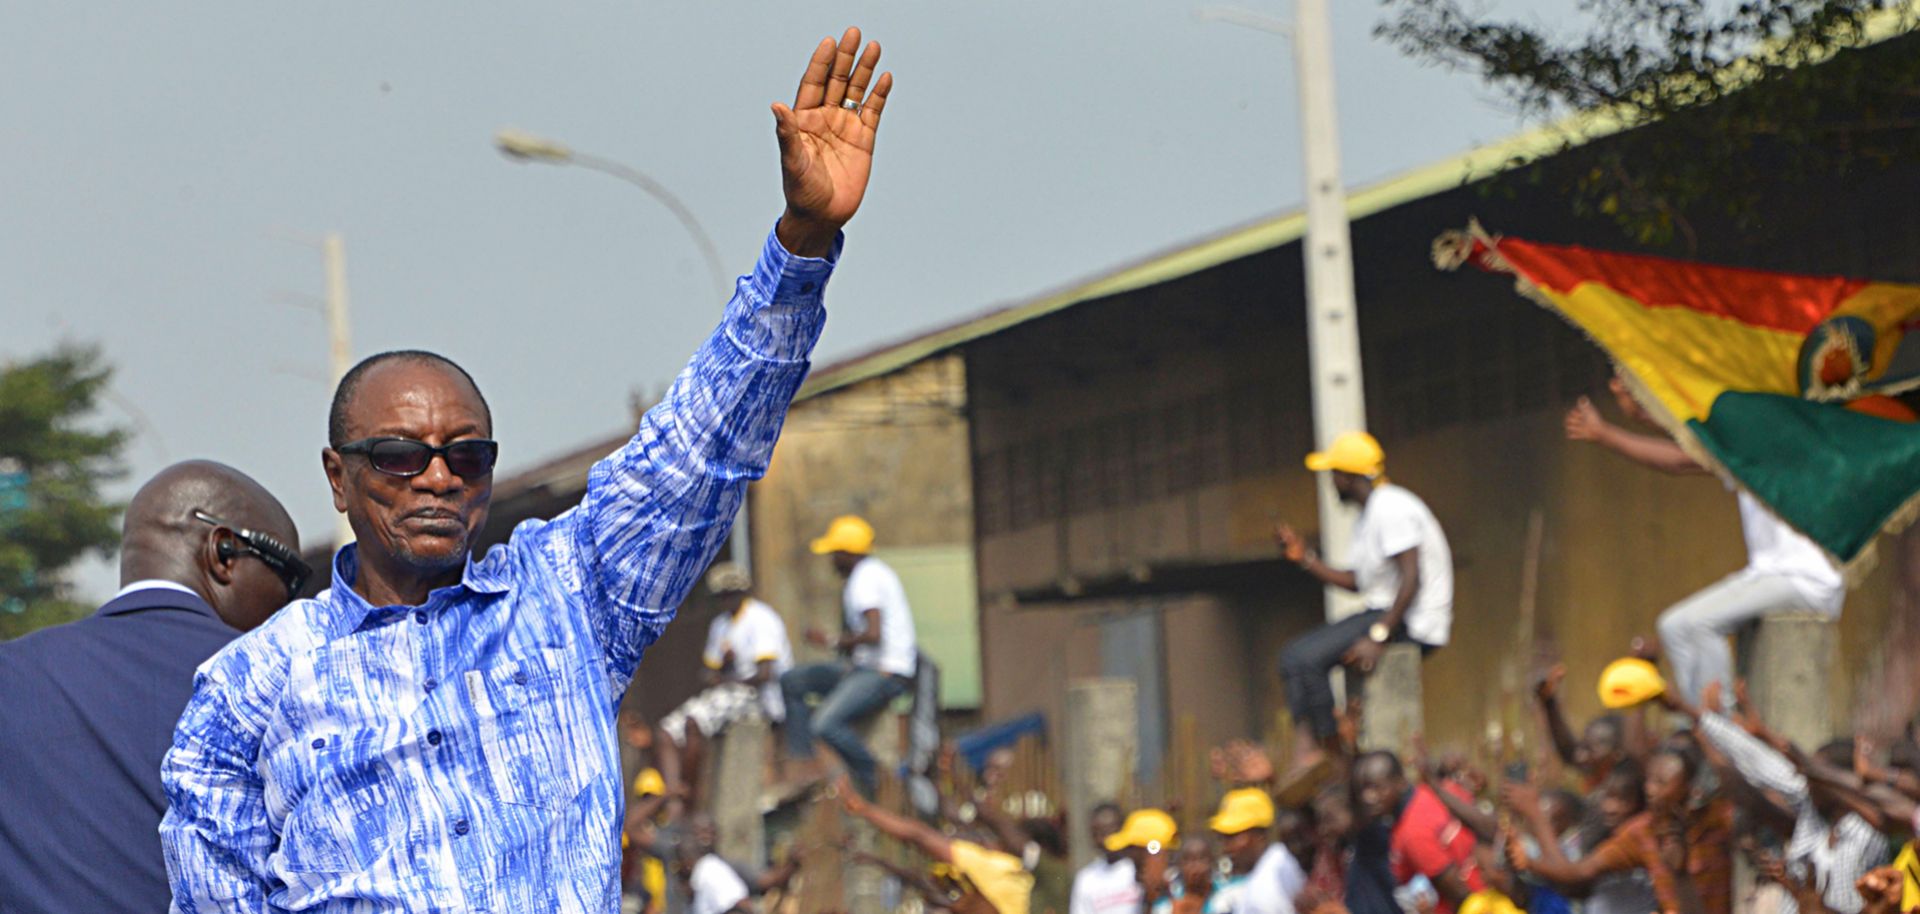 Guinean president Alpha Conde rallies supporters in Conakry after a series of violent protests opposing his efforts to extend his term in office.